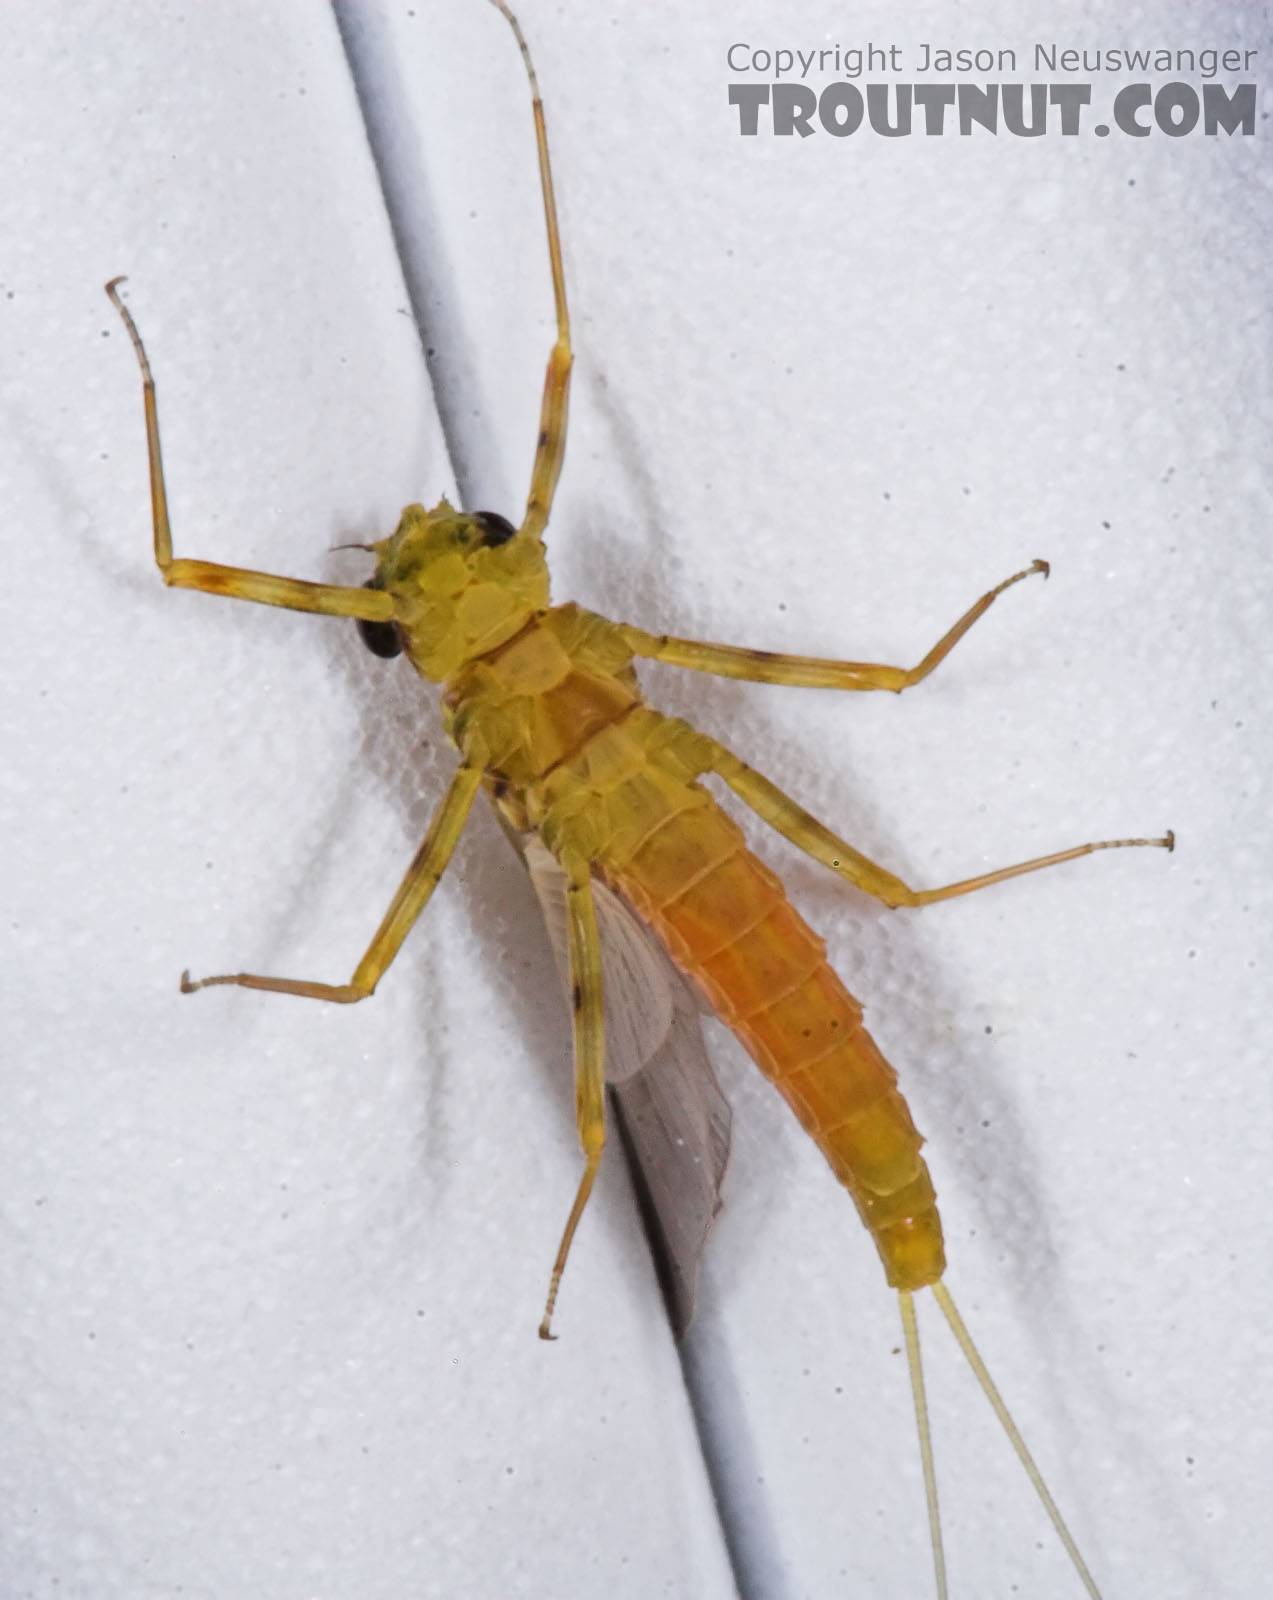 Female Epeorus vitreus (Sulphur) Mayfly Dun from the Namekagon River in Wisconsin